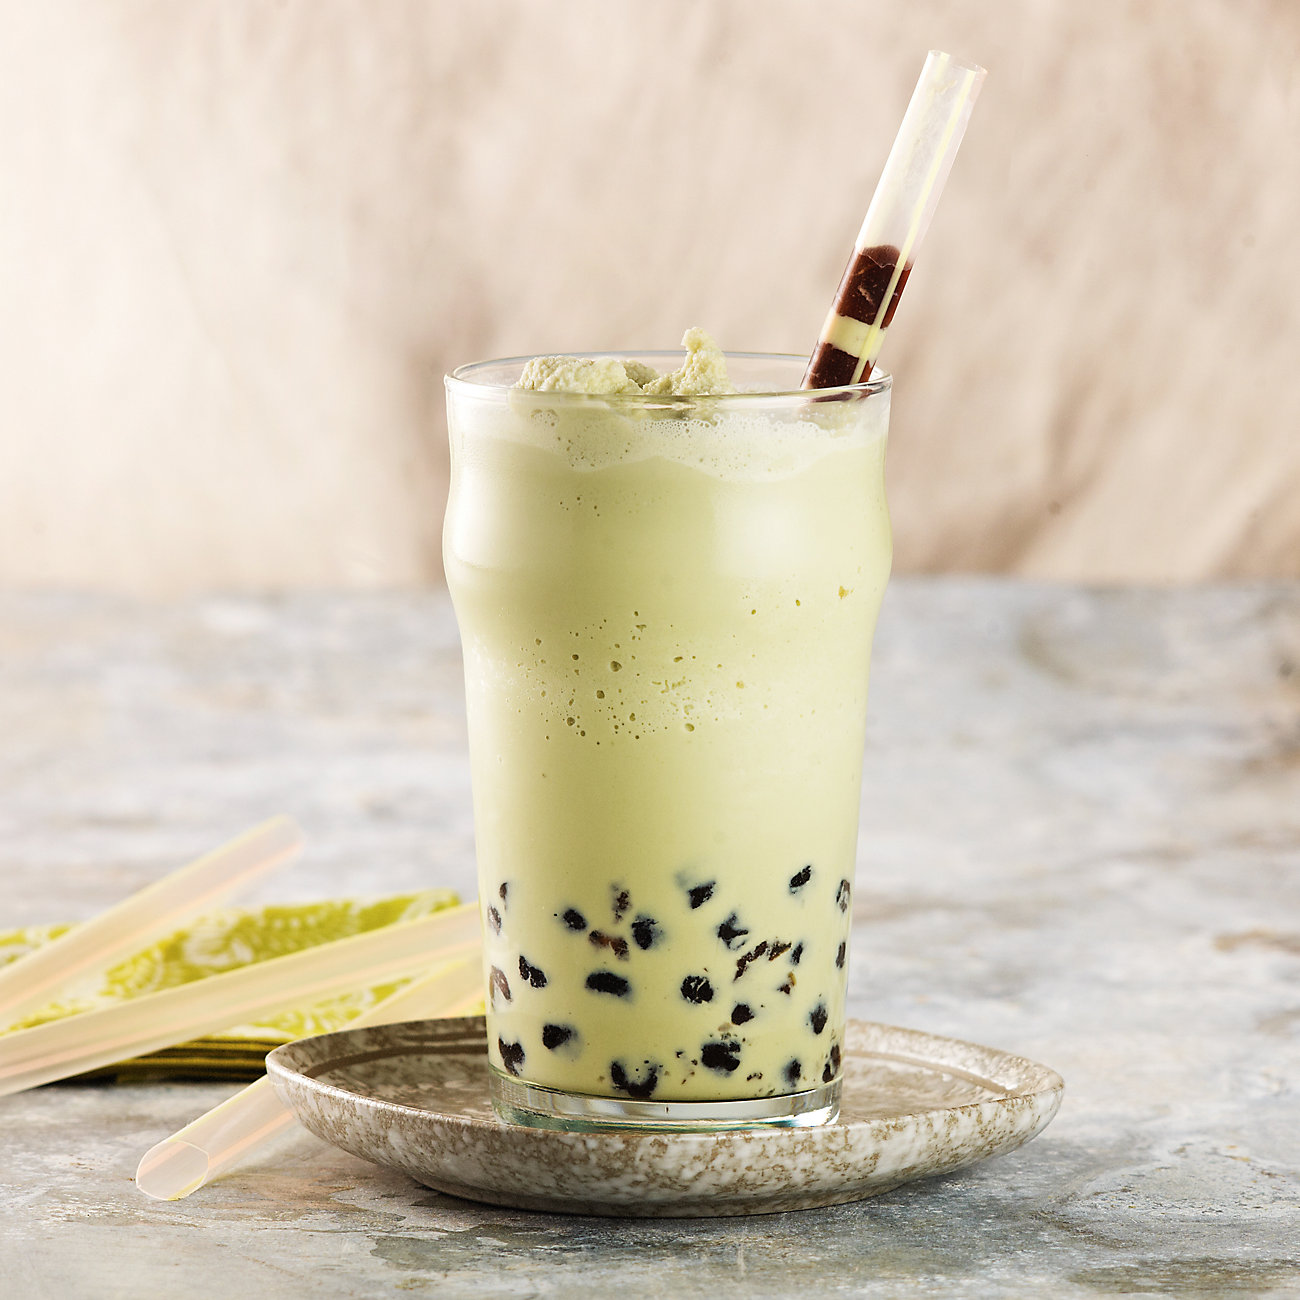 https://images.heb.com/is/image/HEBGrocery/Large/bubble-tea-recipe-1.jpg